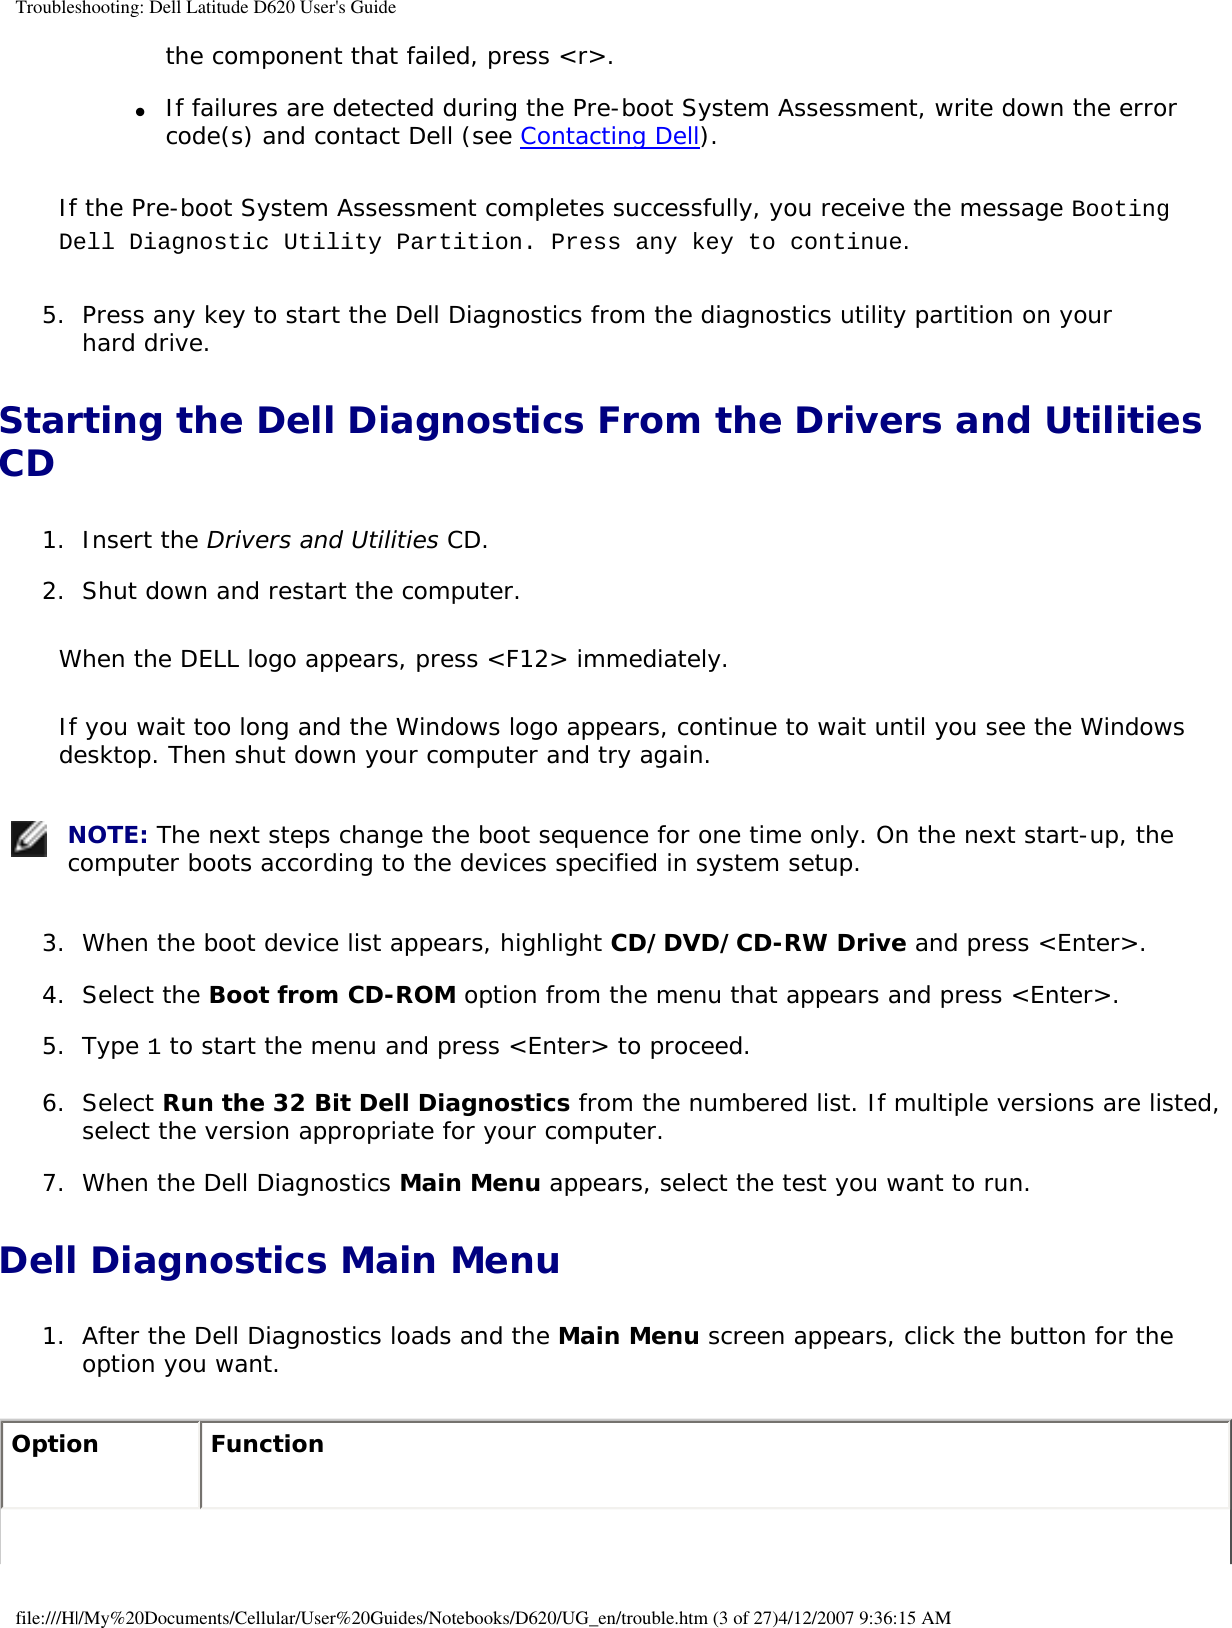 Troubleshooting: Dell Latitude D620 User&apos;s Guidethe component that failed, press &lt;r&gt;.   ●     If failures are detected during the Pre-boot System Assessment, write down the error code(s) and contact Dell (see Contacting Dell).  If the Pre-boot System Assessment completes successfully, you receive the message Booting Dell Diagnostic Utility Partition. Press any key to continue.5.  Press any key to start the Dell Diagnostics from the diagnostics utility partition on your hard drive.   Starting the Dell Diagnostics From the Drivers and Utilities CD1.  Insert the Drivers and Utilities CD.   2.  Shut down and restart the computer.   When the DELL logo appears, press &lt;F12&gt; immediately.If you wait too long and the Windows logo appears, continue to wait until you see the Windows desktop. Then shut down your computer and try again. NOTE: The next steps change the boot sequence for one time only. On the next start-up, the computer boots according to the devices specified in system setup.3.  When the boot device list appears, highlight CD/DVD/CD-RW Drive and press &lt;Enter&gt;.   4.  Select the Boot from CD-ROM option from the menu that appears and press &lt;Enter&gt;.   5.  Type 1 to start the menu and press &lt;Enter&gt; to proceed.   6.  Select Run the 32 Bit Dell Diagnostics from the numbered list. If multiple versions are listed, select the version appropriate for your computer.   7.  When the Dell Diagnostics Main Menu appears, select the test you want to run.   Dell Diagnostics Main Menu1.  After the Dell Diagnostics loads and the Main Menu screen appears, click the button for the option you want.   Option Functionfile:///H|/My%20Documents/Cellular/User%20Guides/Notebooks/D620/UG_en/trouble.htm (3 of 27)4/12/2007 9:36:15 AM